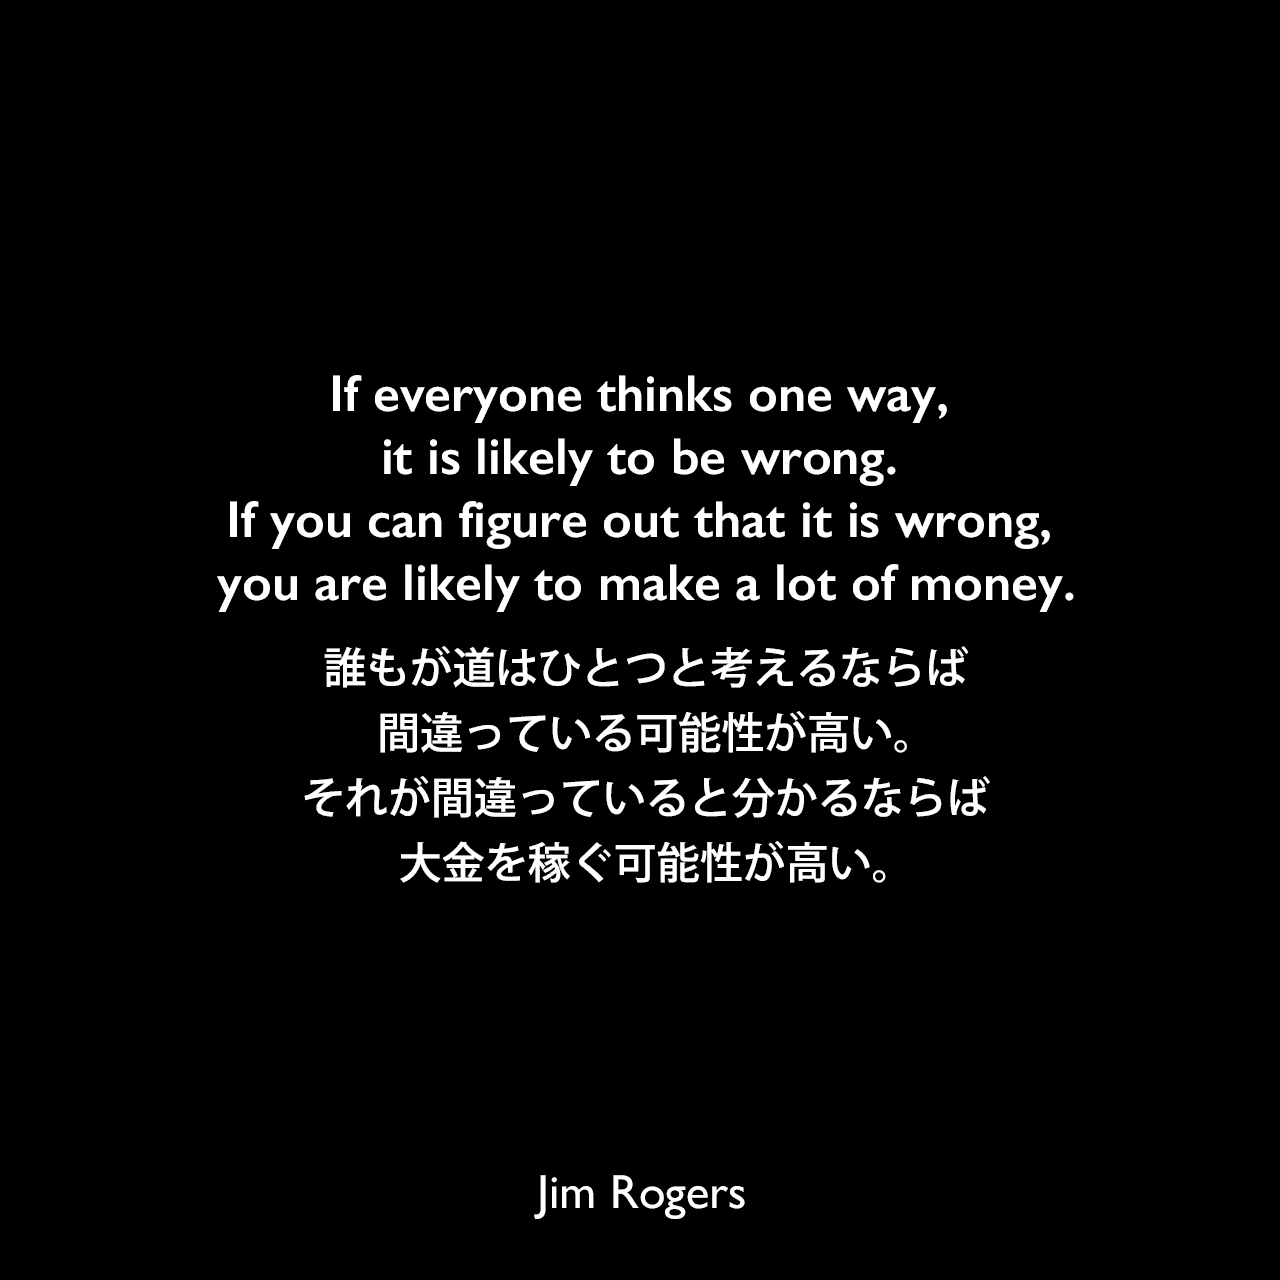 If everyone thinks one way, it is likely to be wrong. If you can figure out that it is wrong, you are likely to make a lot of money.誰もが道はひとつと考えるならば、間違っている可能性が高い。それが間違っていると分かるならば、大金を稼ぐ可能性が高い。Jim Rogers